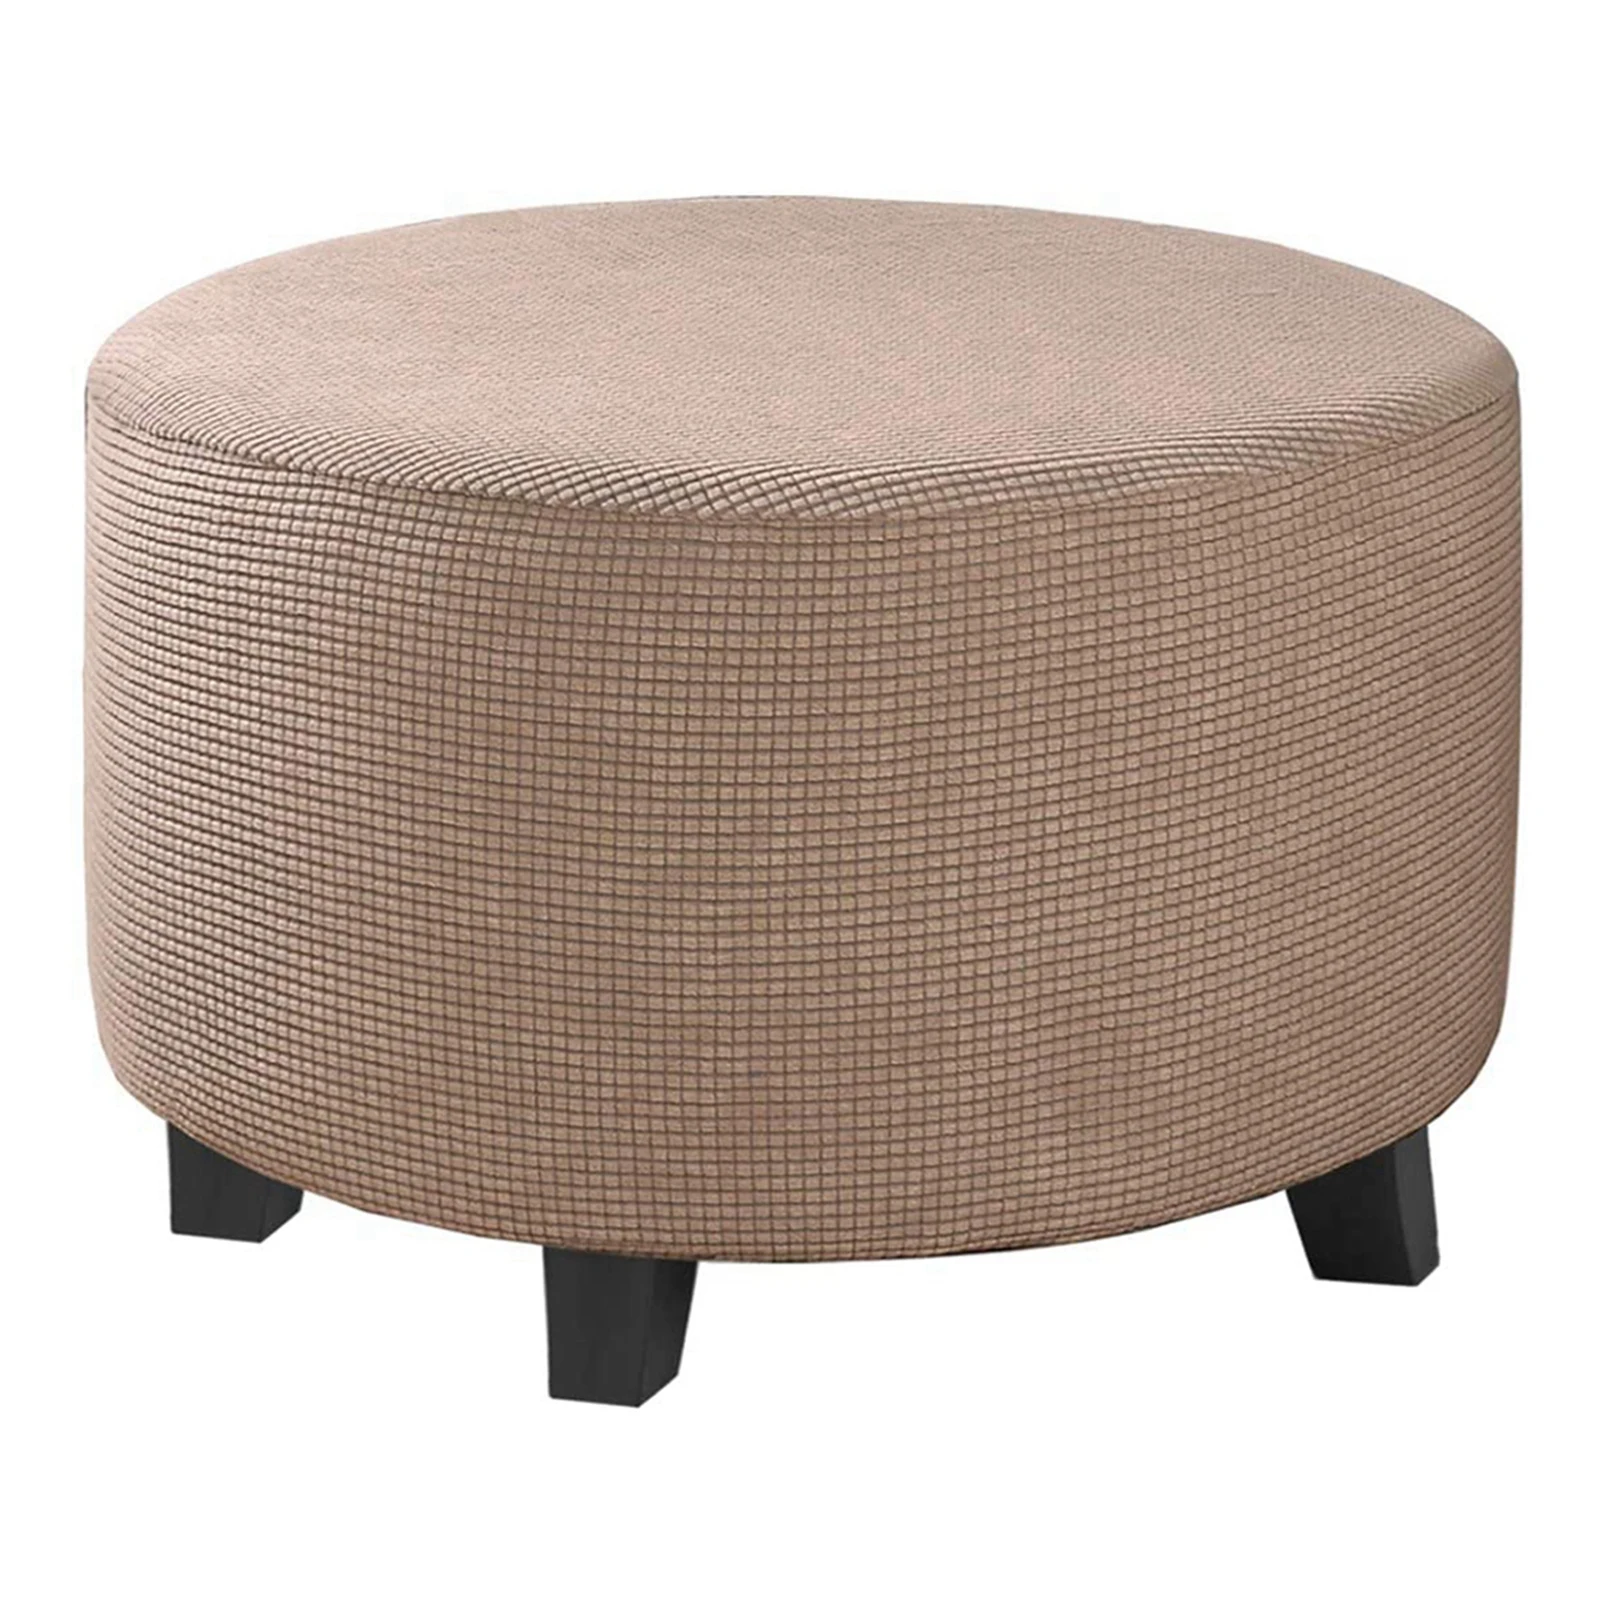 Furniture Ottoman Slipcover with Elastic Bottom for Living Room ALEOHALTER Round Ottoman Cover Stretch Footstool Protector Cover